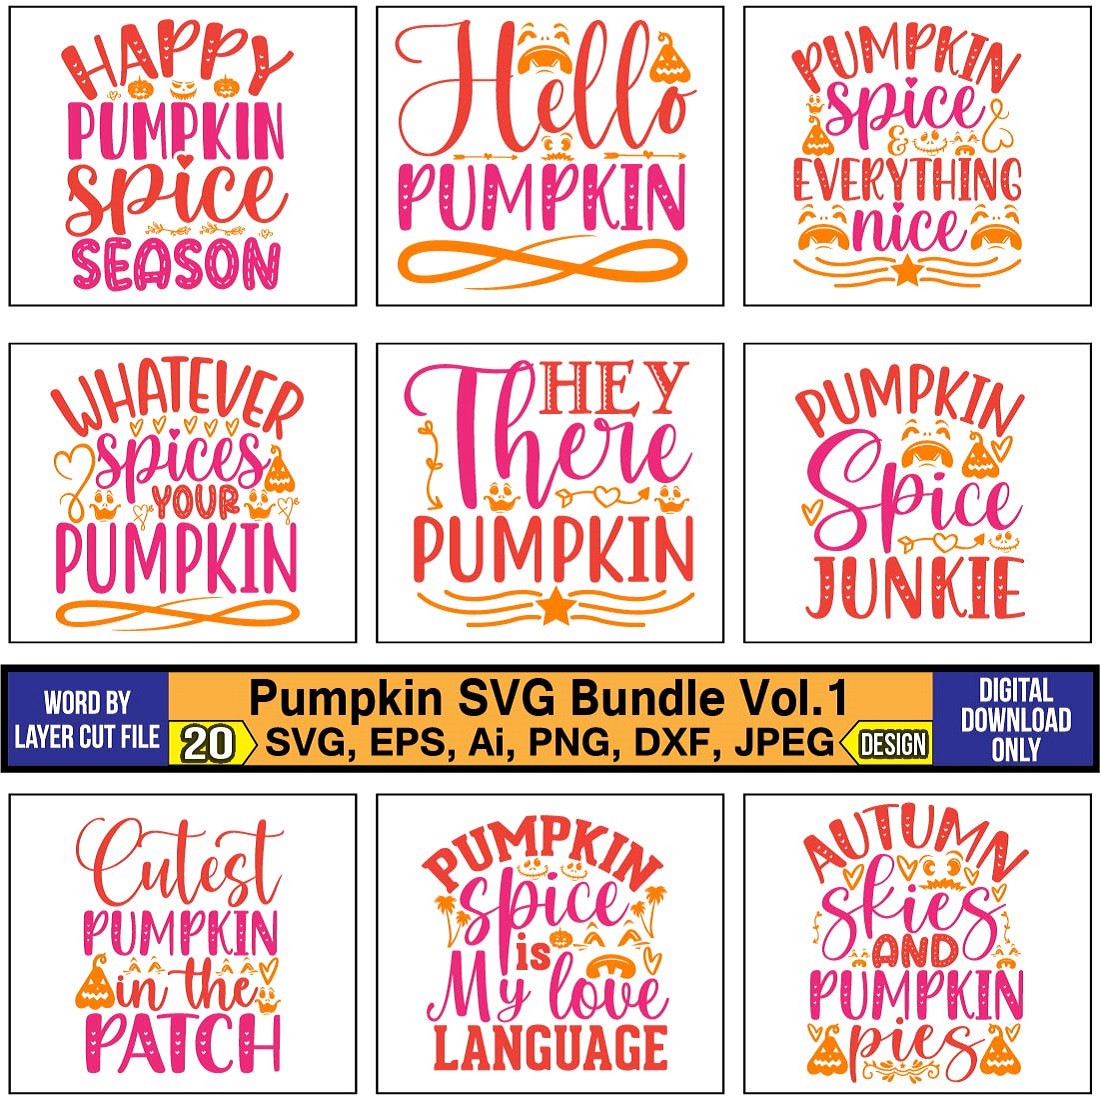 A set of gorgeous images for prints on the theme of pumpkin.